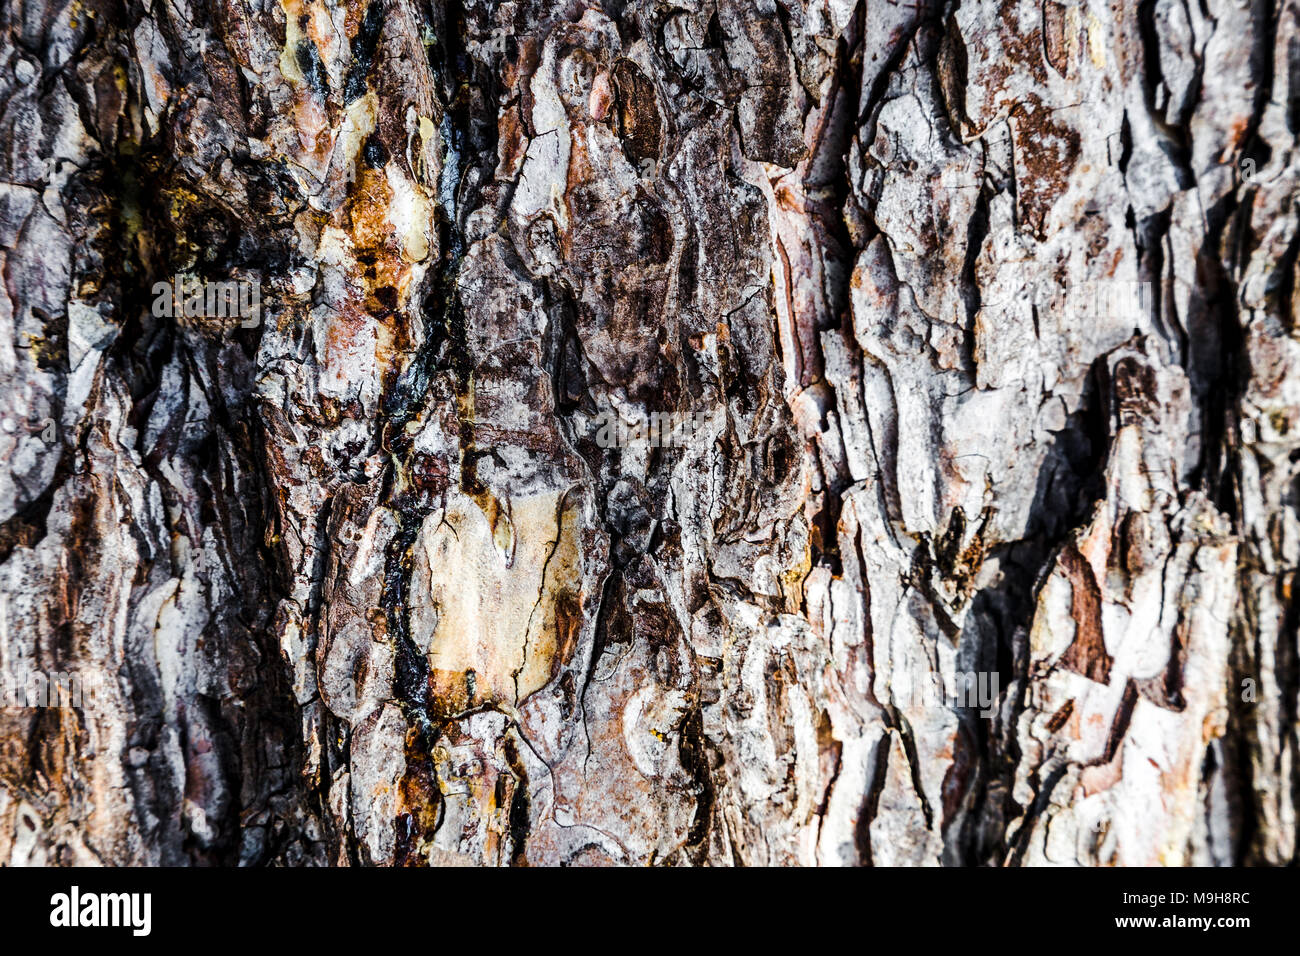 trunk of pine, background image, close-up Stock Photo